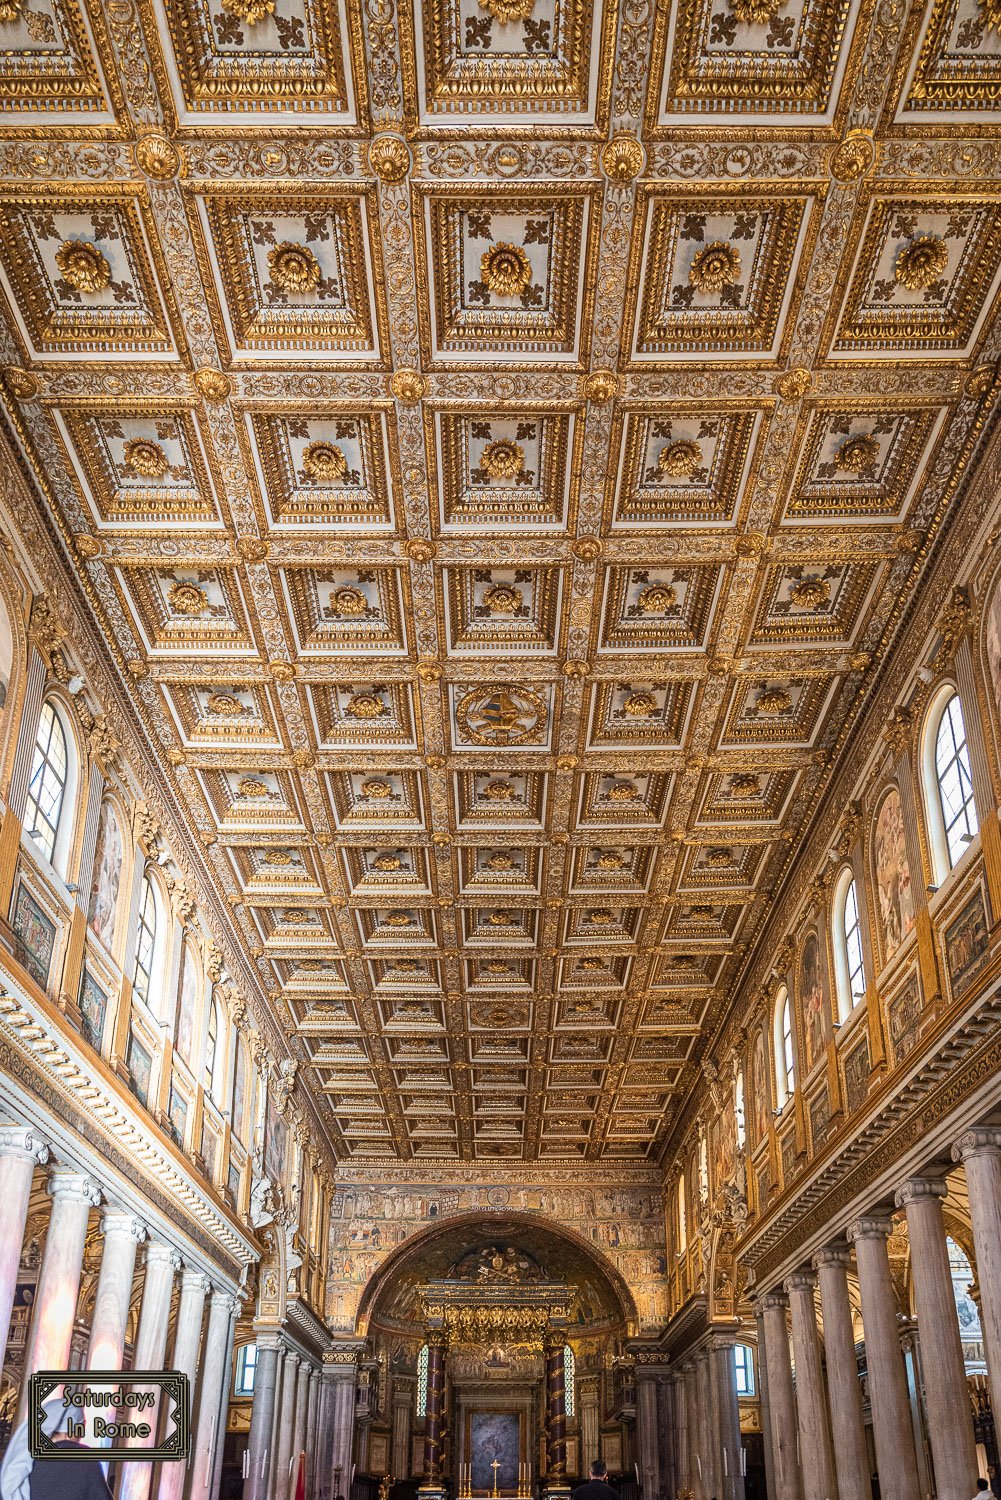 Basilica of Saint Mary Major - Coffered Ceiling